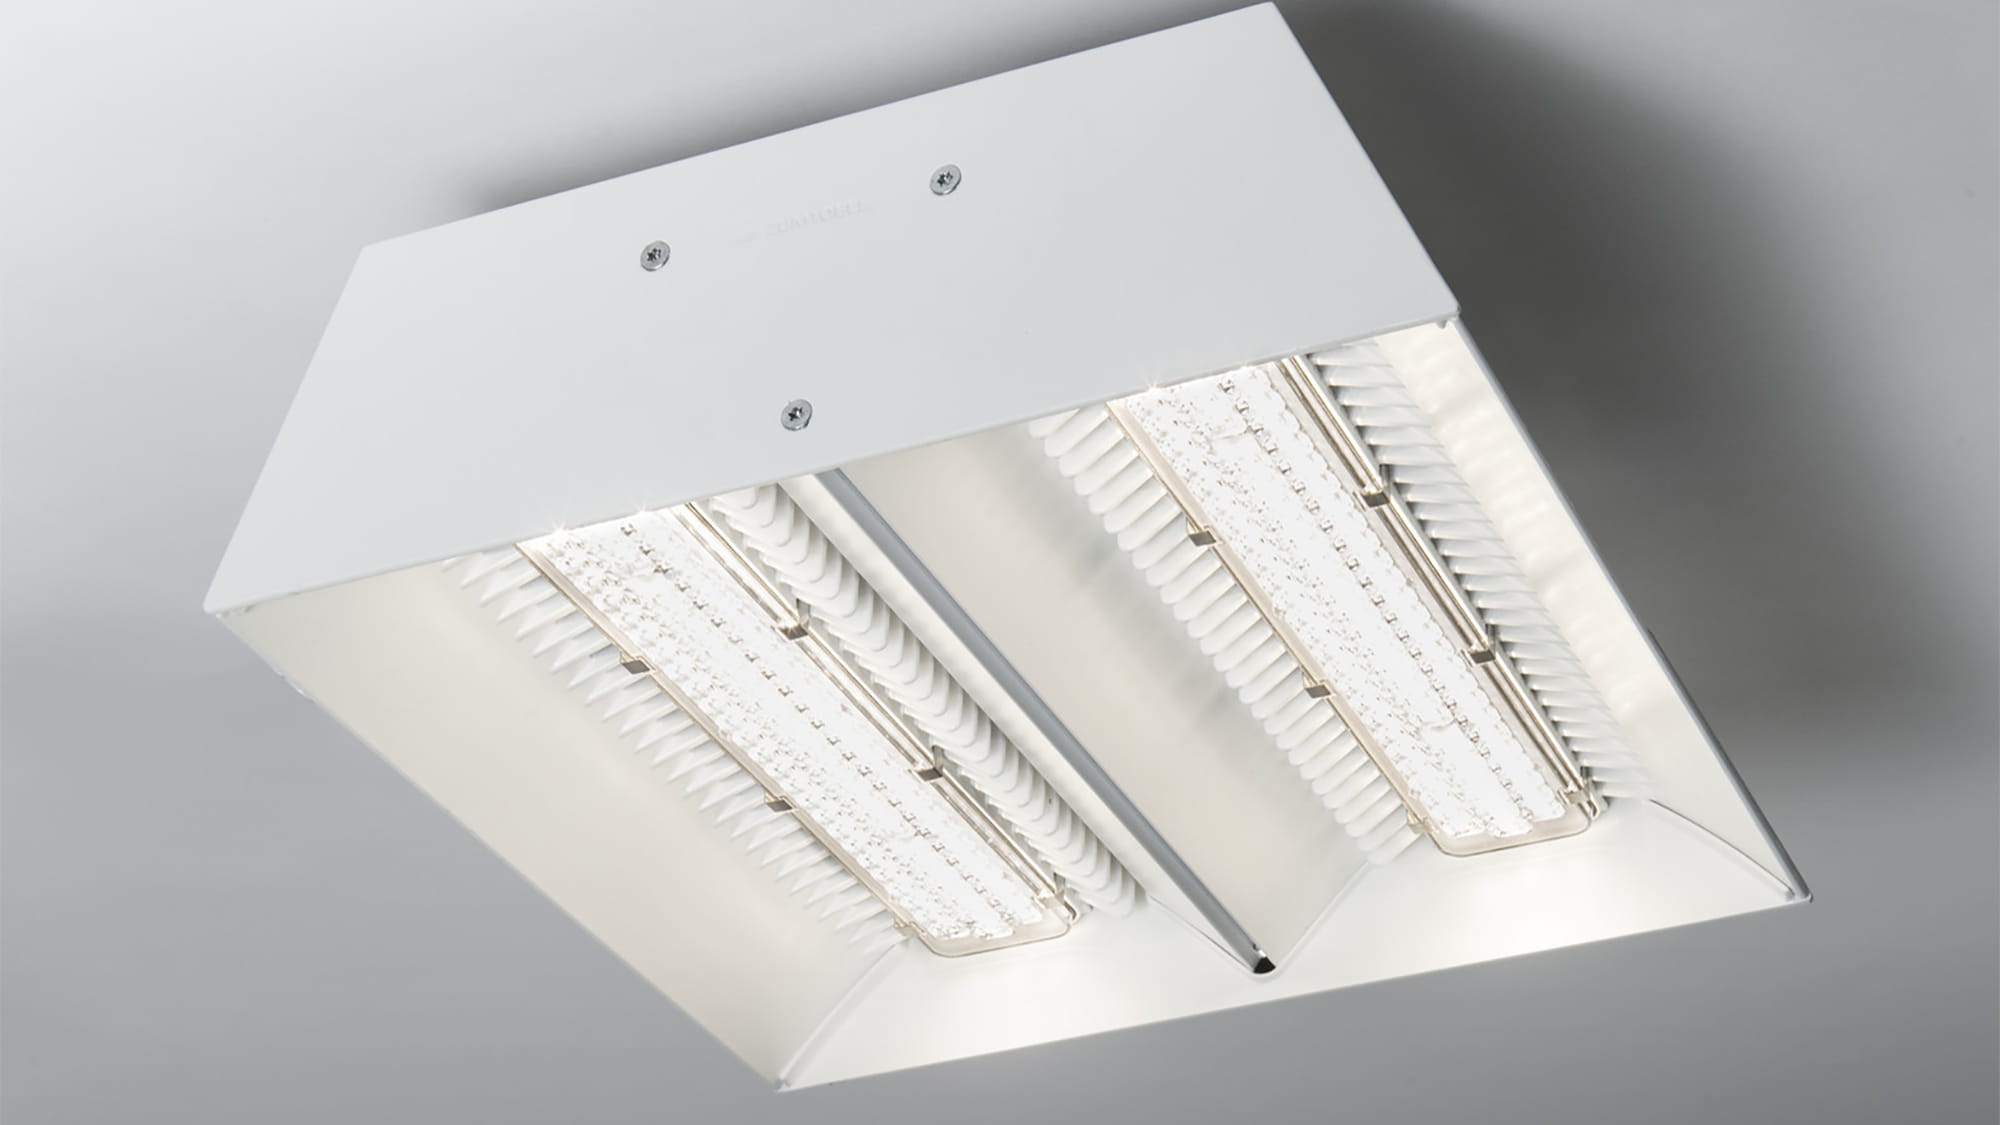 The product design of the LED lighting